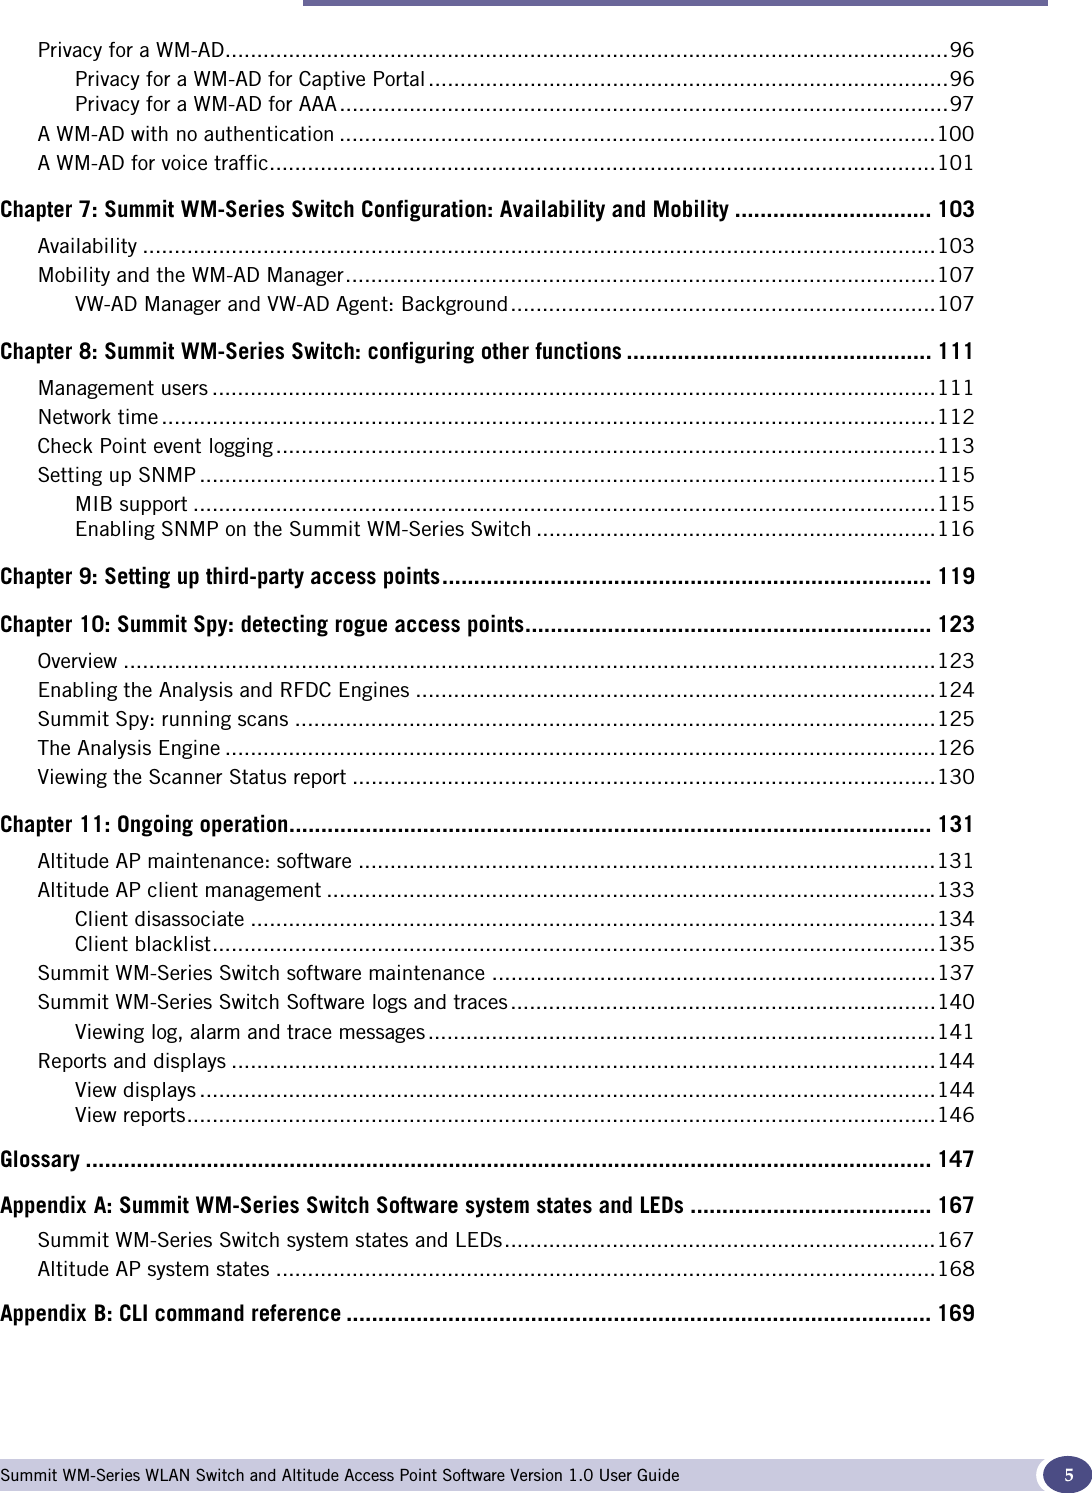 Table of Contents Summit WM-Series WLAN Switch and Altitude Access Point Software Version 1.0 User Guide 5Privacy for a WM-AD..................................................................................................................96Privacy for a WM-AD for Captive Portal ..................................................................................96Privacy for a WM-AD for AAA................................................................................................97A WM-AD with no authentication ..............................................................................................100A WM-AD for voice traffic.........................................................................................................101Chapter 7: Summit WM-Series Switch Configuration: Availability and Mobility ............................... 103Availability .............................................................................................................................103Mobility and the WM-AD Manager.............................................................................................107VW-AD Manager and VW-AD Agent: Background...................................................................107Chapter 8: Summit WM-Series Switch: configuring other functions ................................................ 111Management users ..................................................................................................................111Network time ..........................................................................................................................112Check Point event logging ........................................................................................................113Setting up SNMP ....................................................................................................................115MIB support .....................................................................................................................115Enabling SNMP on the Summit WM-Series Switch ...............................................................116Chapter 9: Setting up third-party access points............................................................................. 119Chapter 10: Summit Spy: detecting rogue access points................................................................ 123Overview ................................................................................................................................123Enabling the Analysis and RFDC Engines ..................................................................................124Summit Spy: running scans .....................................................................................................125The Analysis Engine ................................................................................................................126Viewing the Scanner Status report ............................................................................................130Chapter 11: Ongoing operation..................................................................................................... 131Altitude AP maintenance: software ...........................................................................................131Altitude AP client management ................................................................................................133Client disassociate ............................................................................................................134Client blacklist..................................................................................................................135Summit WM-Series Switch software maintenance ......................................................................137Summit WM-Series Switch Software logs and traces...................................................................140Viewing log, alarm and trace messages ................................................................................141Reports and displays ...............................................................................................................144View displays ....................................................................................................................144View reports......................................................................................................................146Glossary ..................................................................................................................................... 147Appendix A: Summit WM-Series Switch Software system states and LEDs ...................................... 167Summit WM-Series Switch system states and LEDs....................................................................167Altitude AP system states ........................................................................................................168Appendix B: CLI command reference ............................................................................................ 169